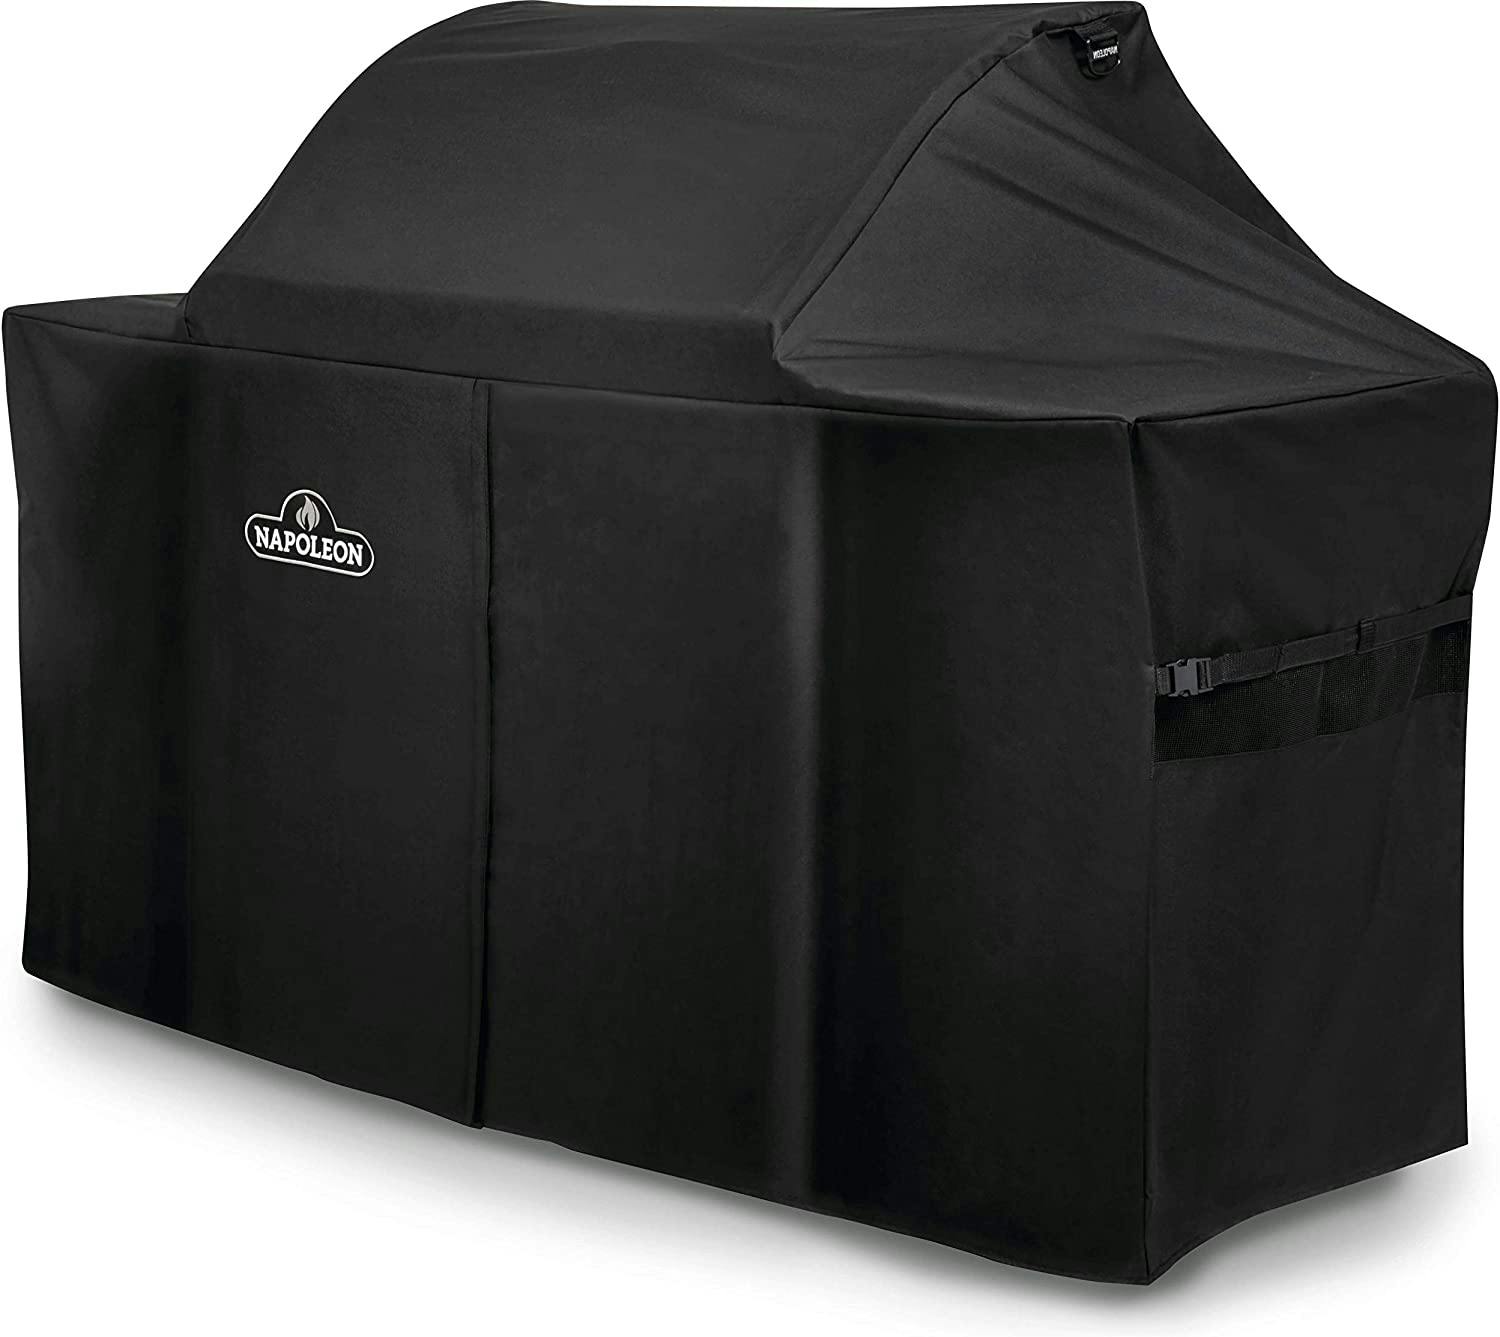 Napoleon Rogue 625 Series Grill Cover · 66 in.